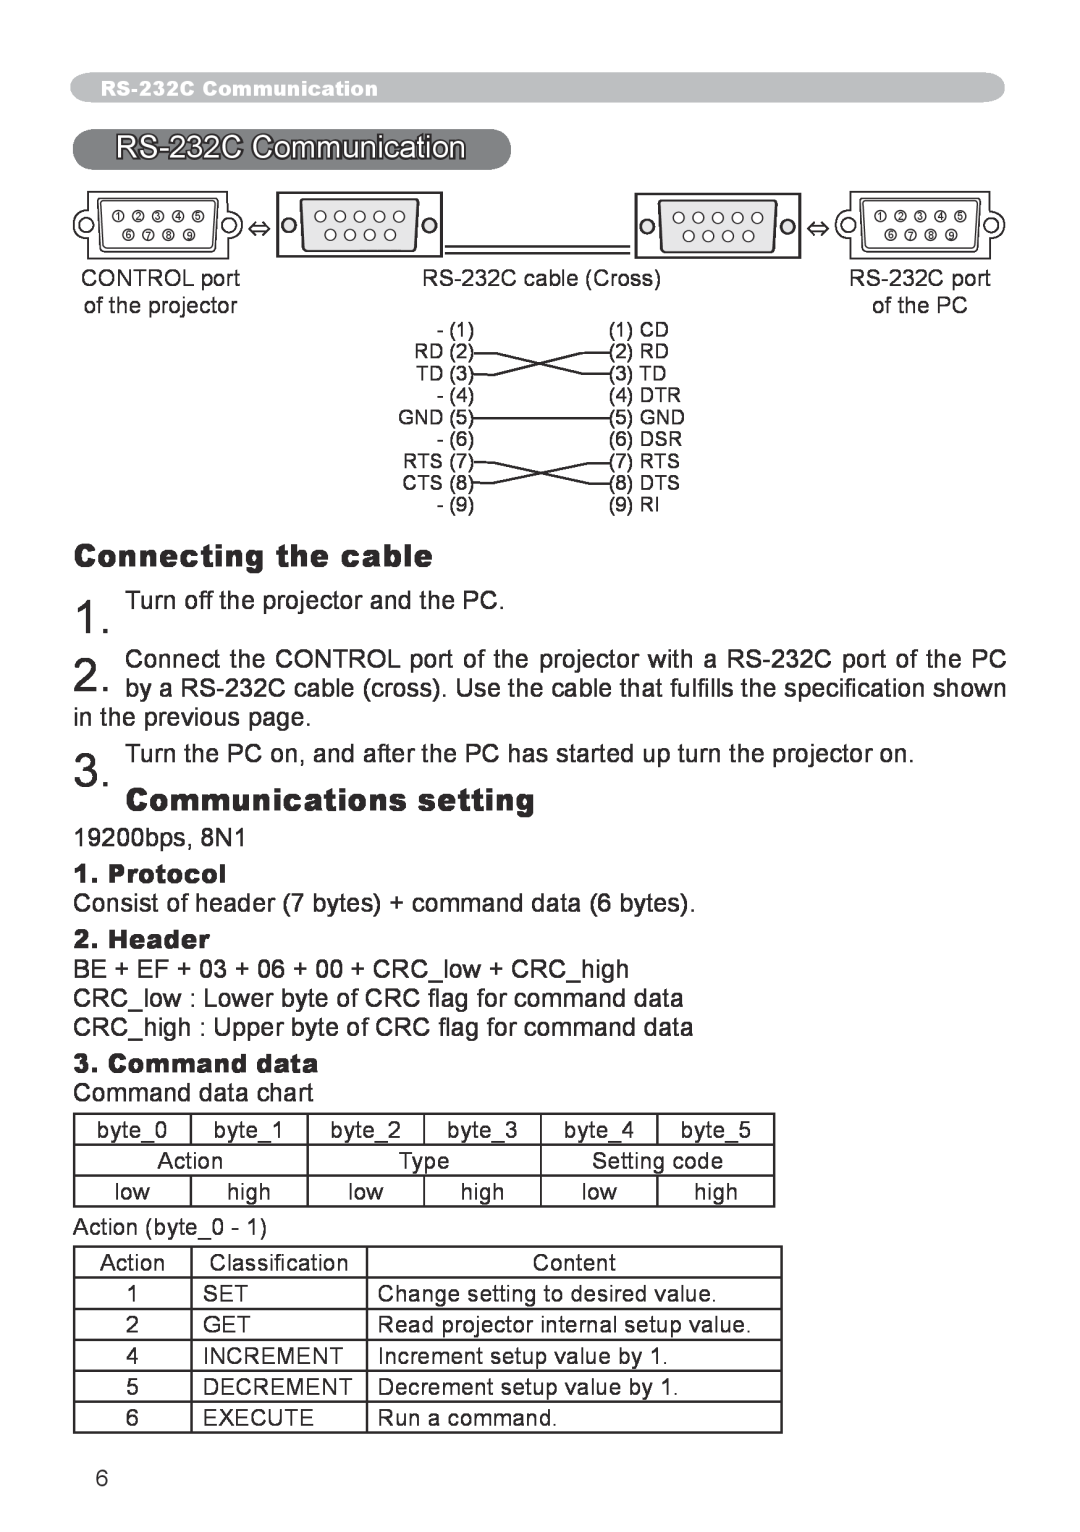 Hitachi CP-X253 RS-232C Communication, Protocol, Header, Command data, Connecting the cable, Communications setting 